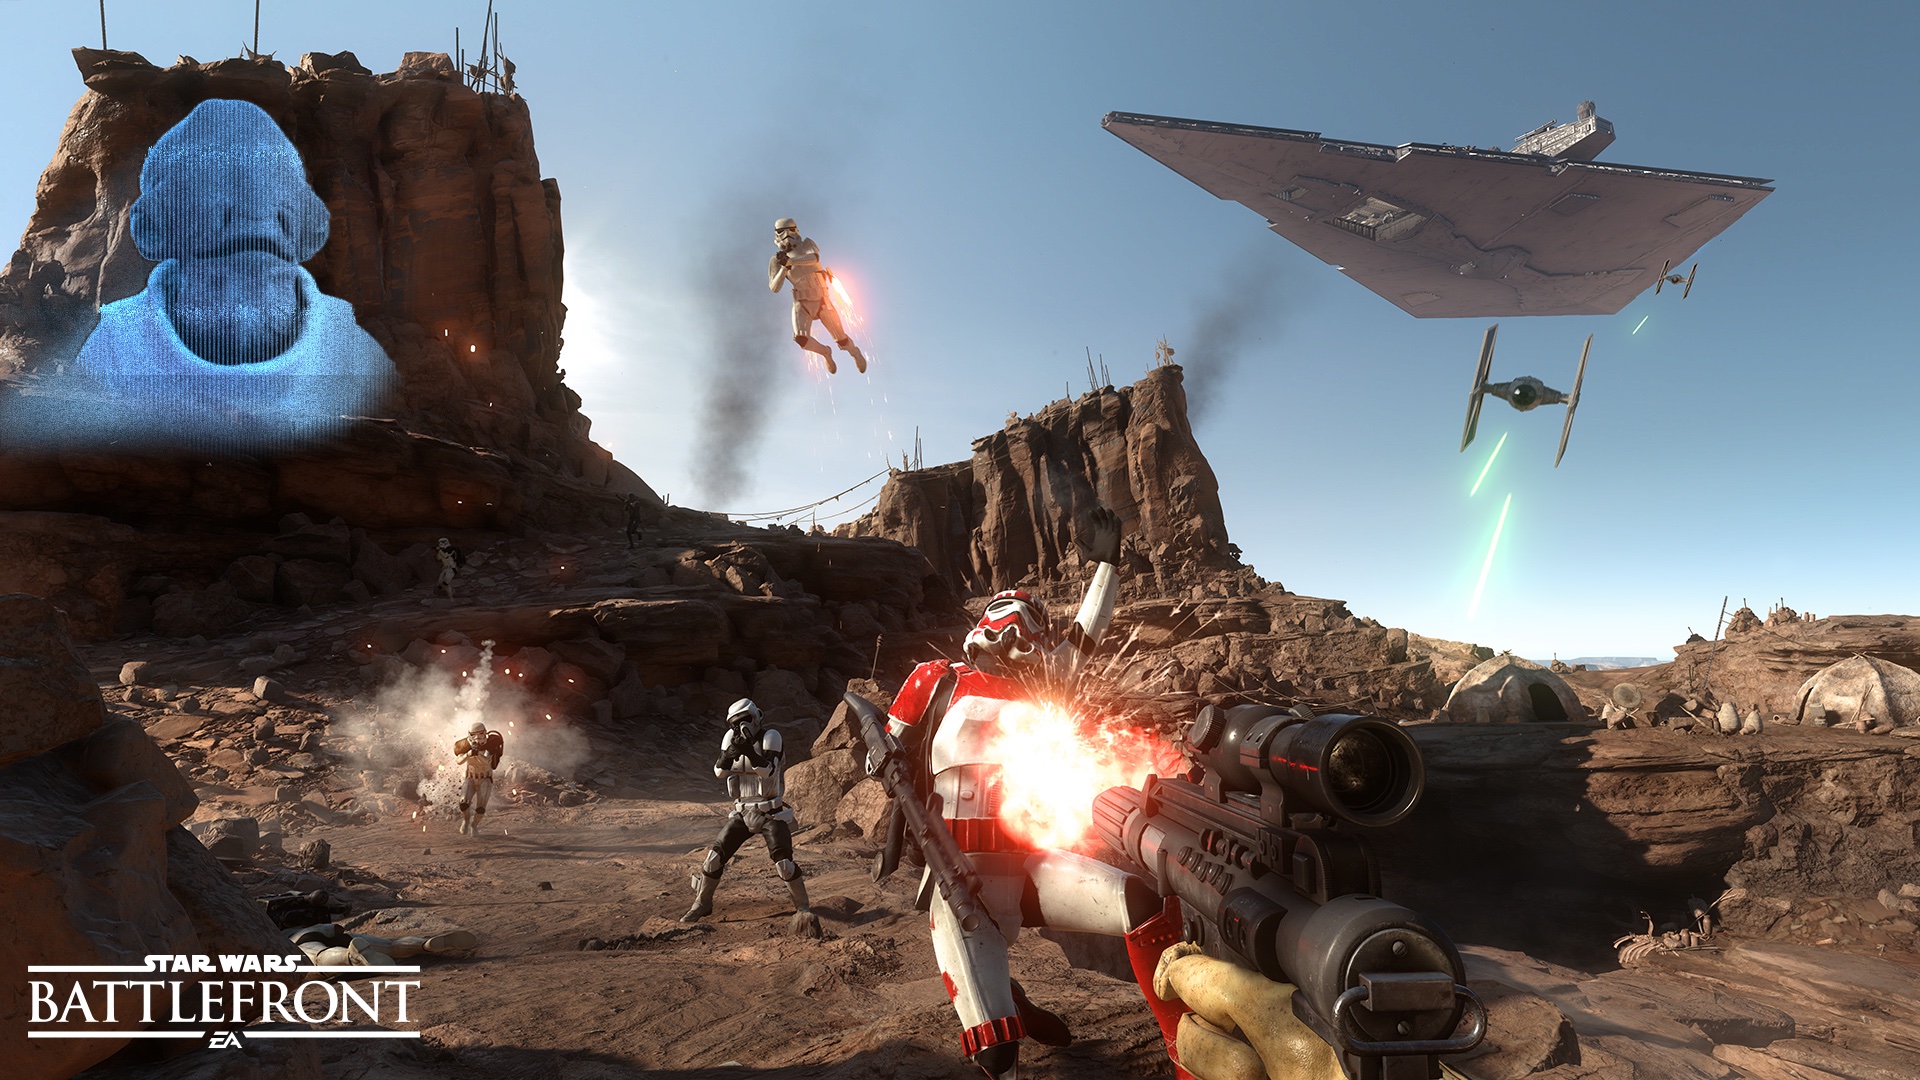 DICE Explains Why Battlefront Doesn't Have a Campaign